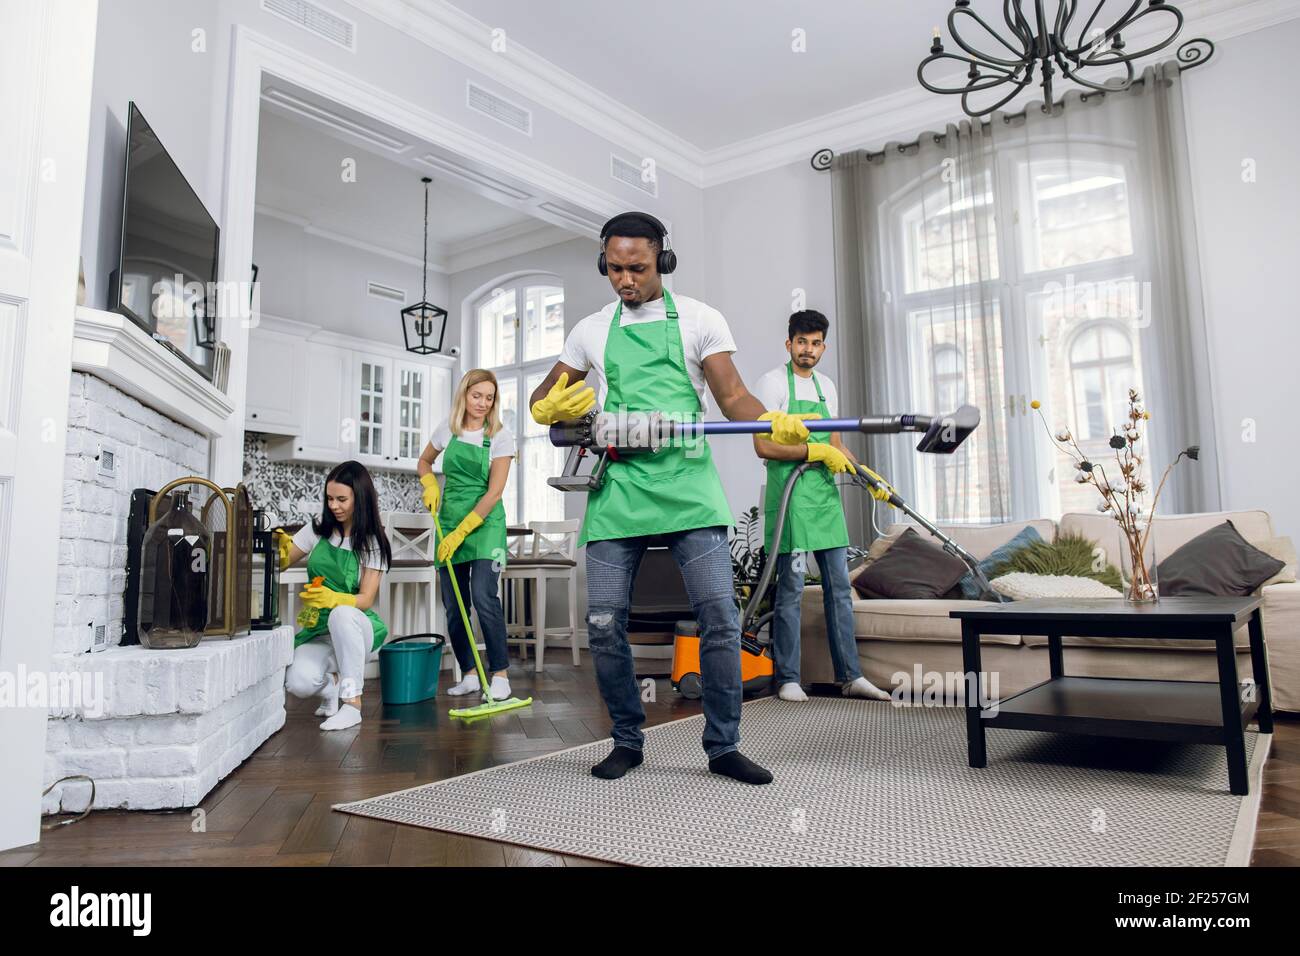 https://c8.alamy.com/comp/2F257GM/young-handsome-crazy-black-skinned-cleaning-service-man-in-uniform-having-fun-wearing-headphones-listening-to-music-and-dancing-with-vacuum-cleaner-2F257GM.jpg